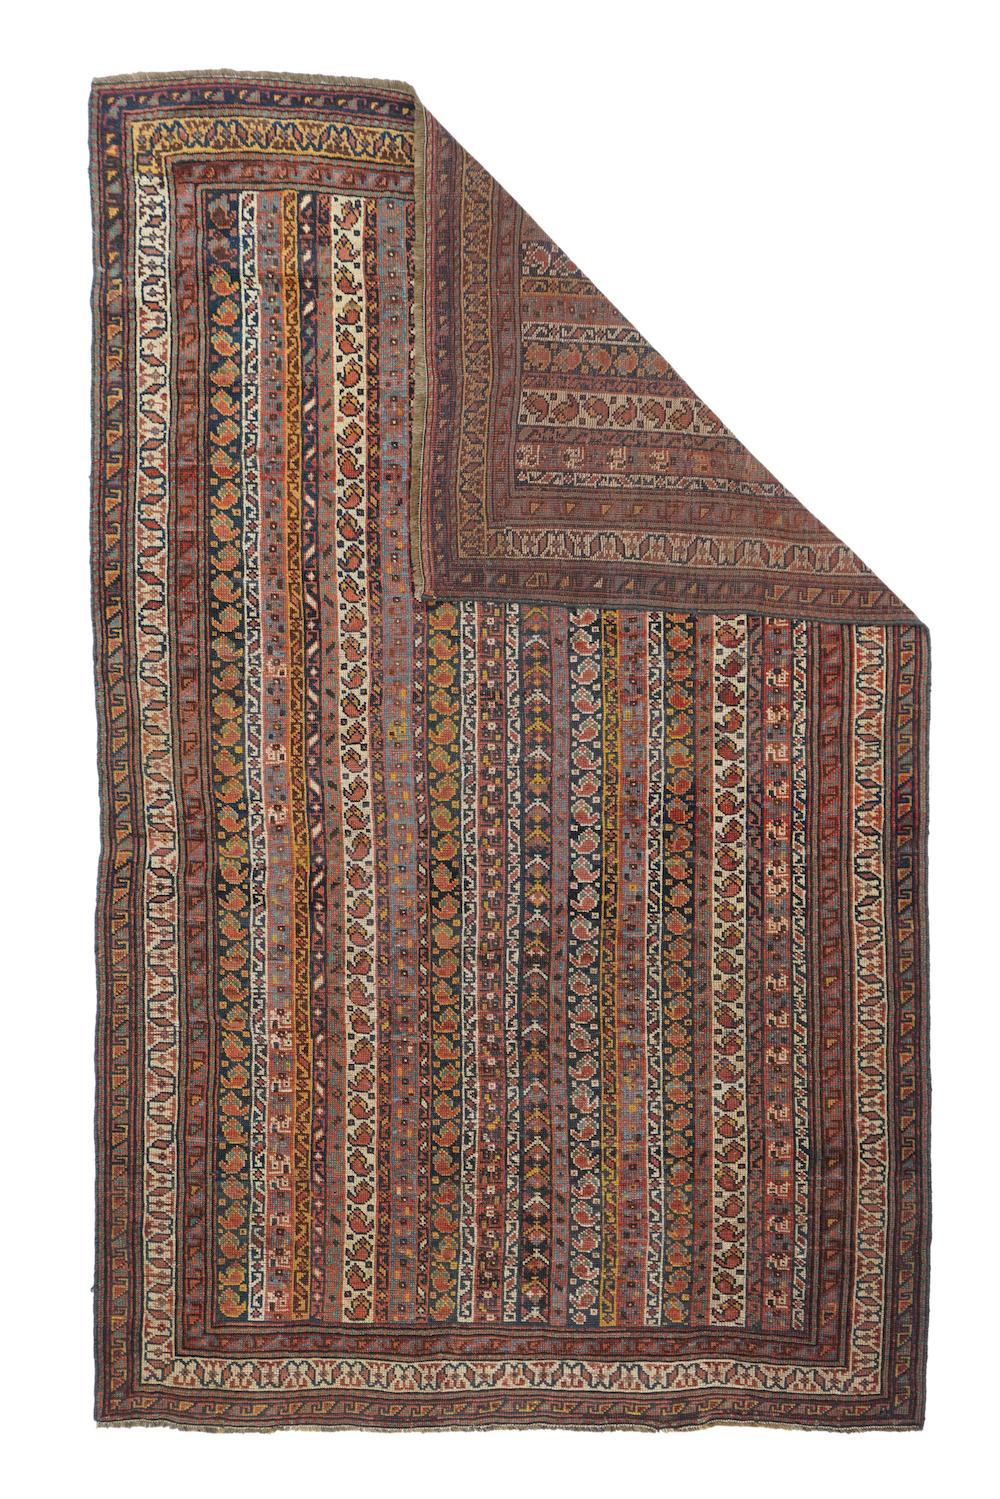 This west Persian village scatter on a wool warp displays the popular “cane” textile  pattern of narrow vertical stripes decorated with floating boteh,  connected S’s, ribbon meanders and chevronned flowers, all in old ivory,  straw yellow,  green,